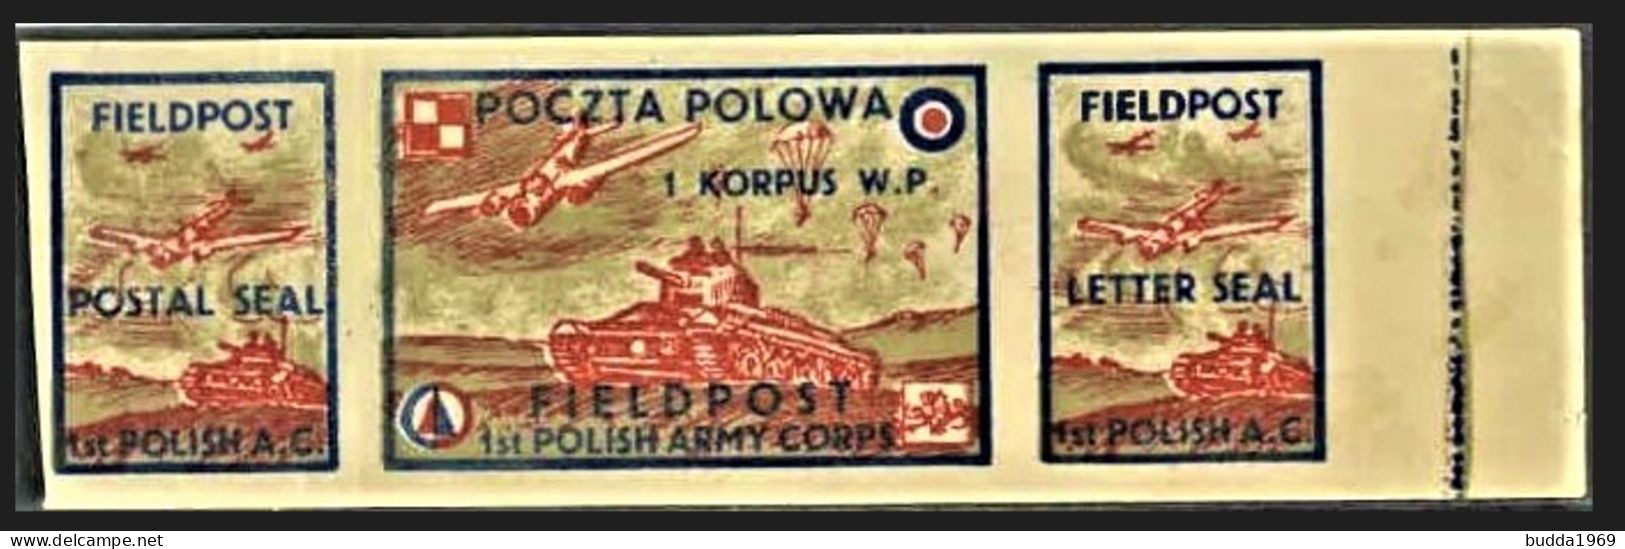 POLAND 1942- FIRST POLISH CORPS IN ENGLAND - FIELDPOST LABEL MNH**! - Londoner Regierung (Exil)